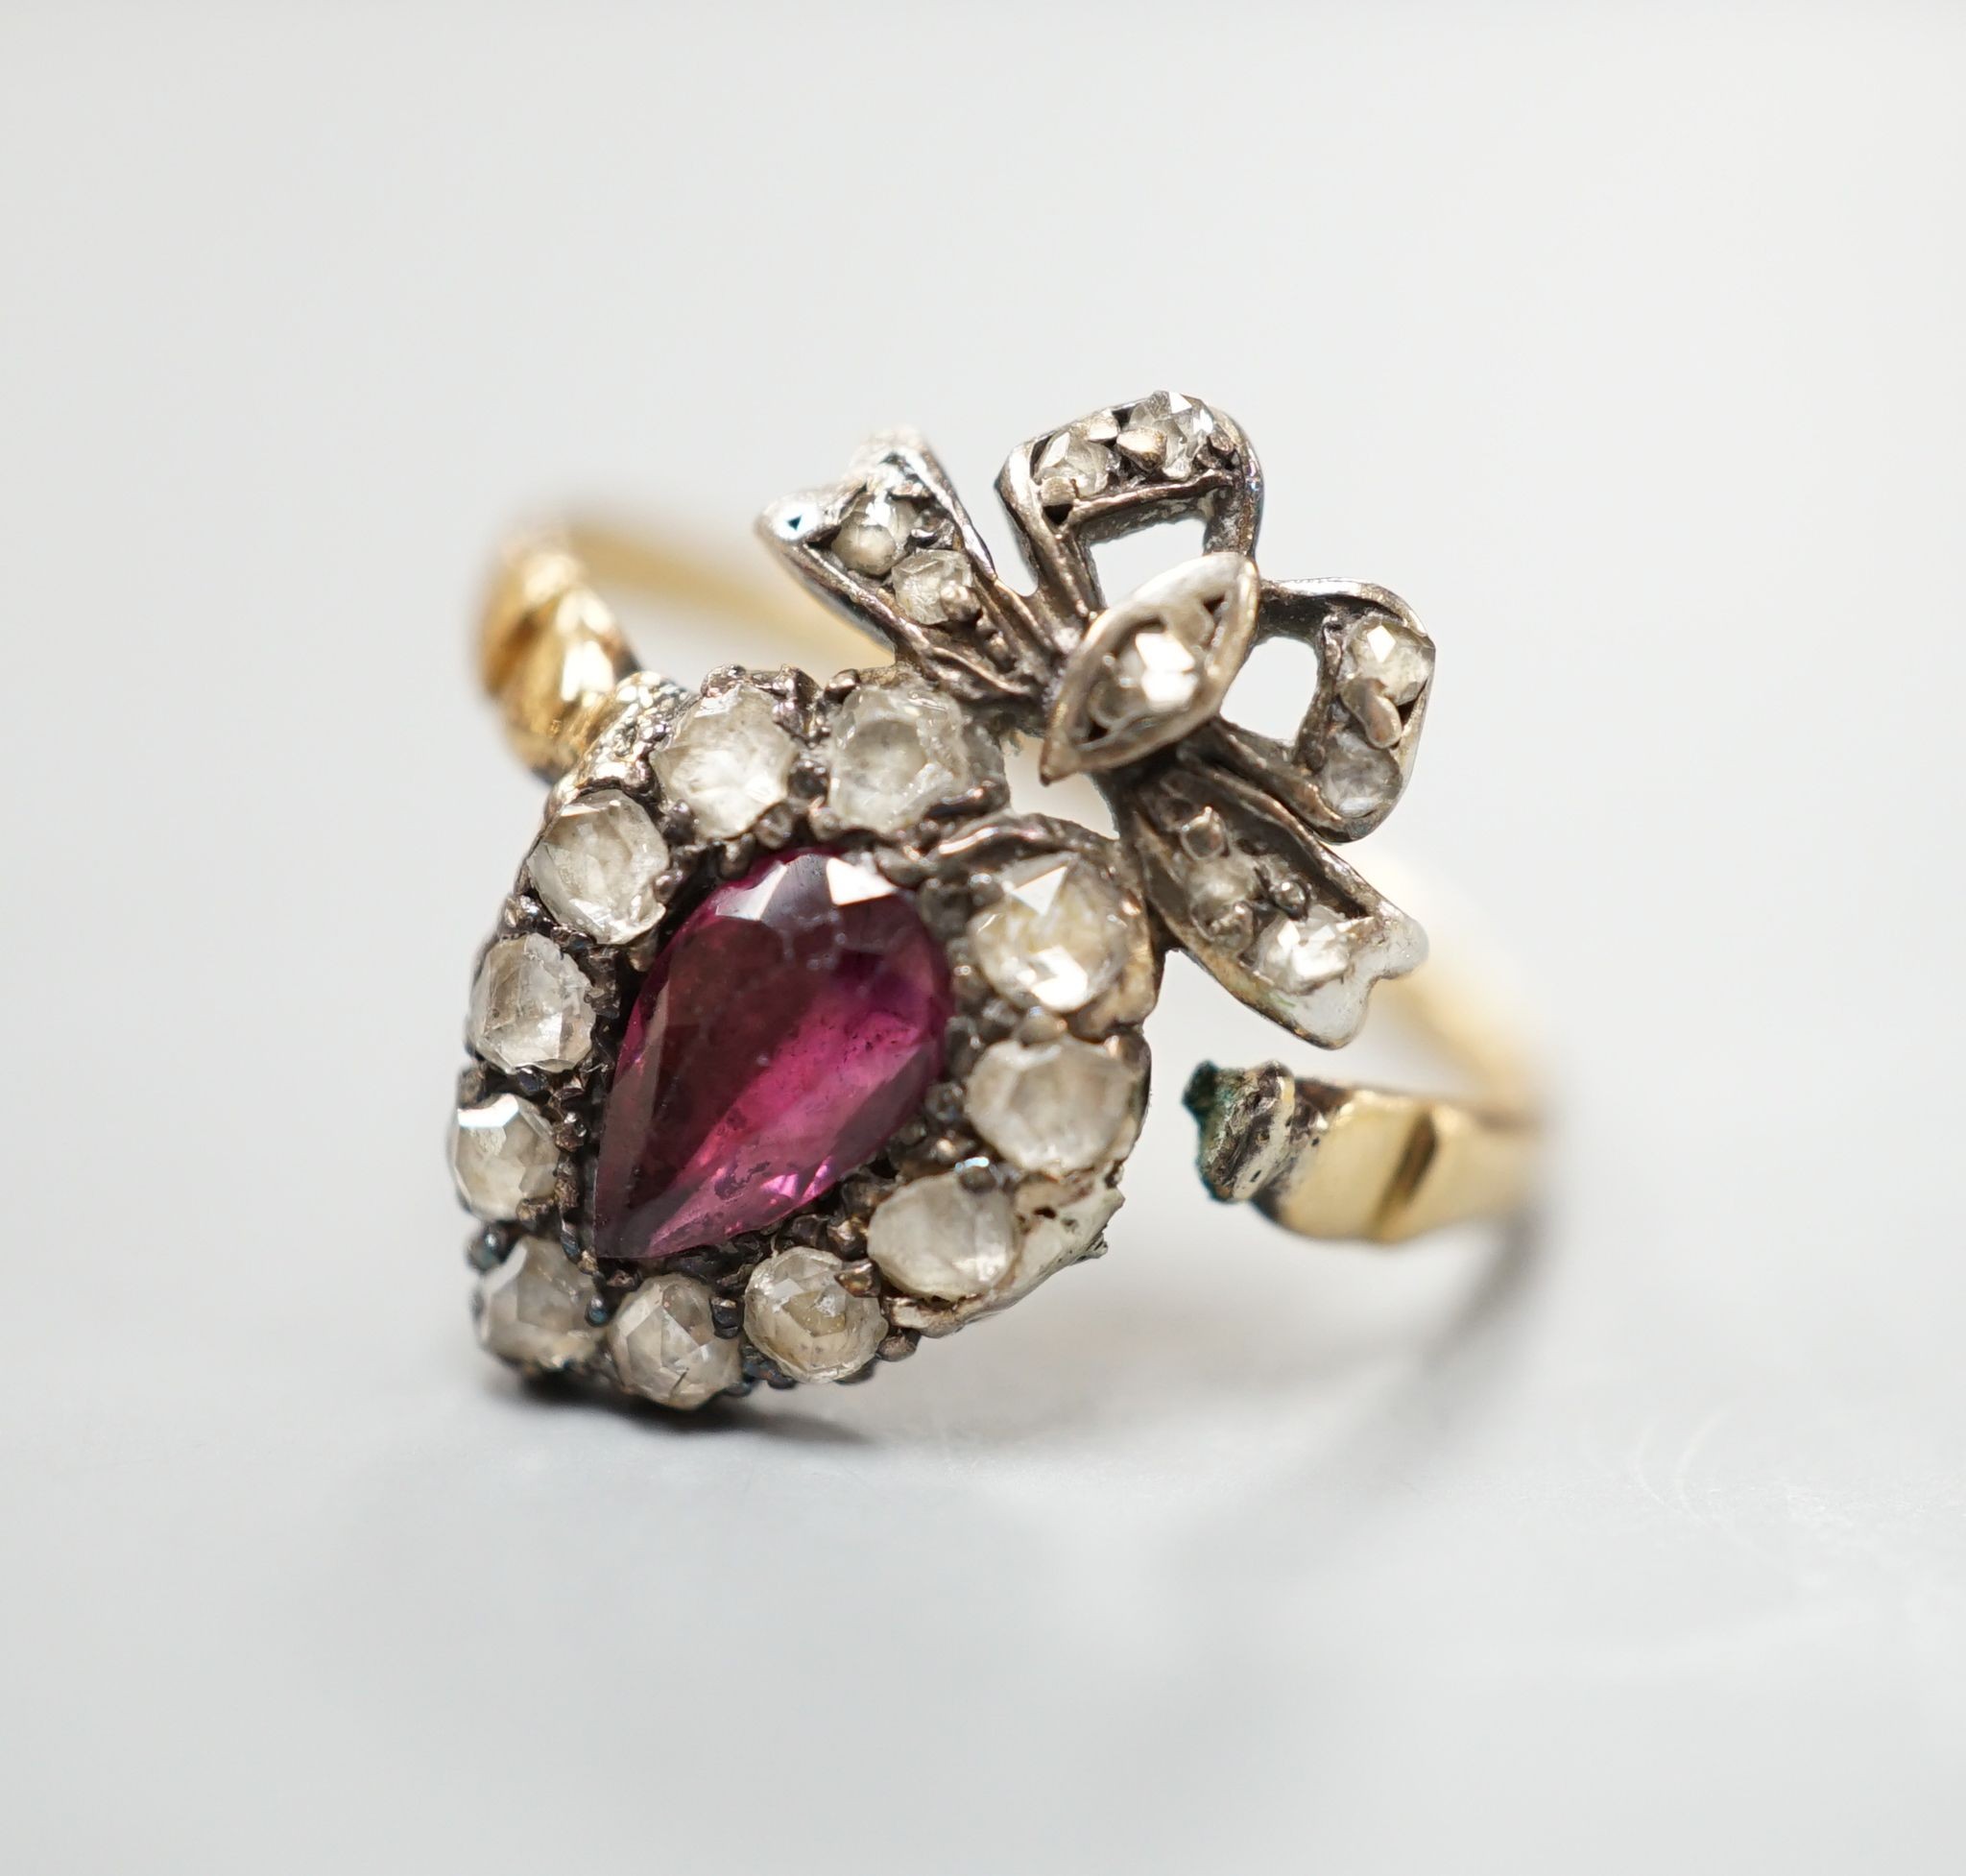 A 19th century yellow metal, garnet and rose cut diamond set heart shaped ring, with ribbon bow crest (shank broken), approx. size H, gross weight 2.2 grams.